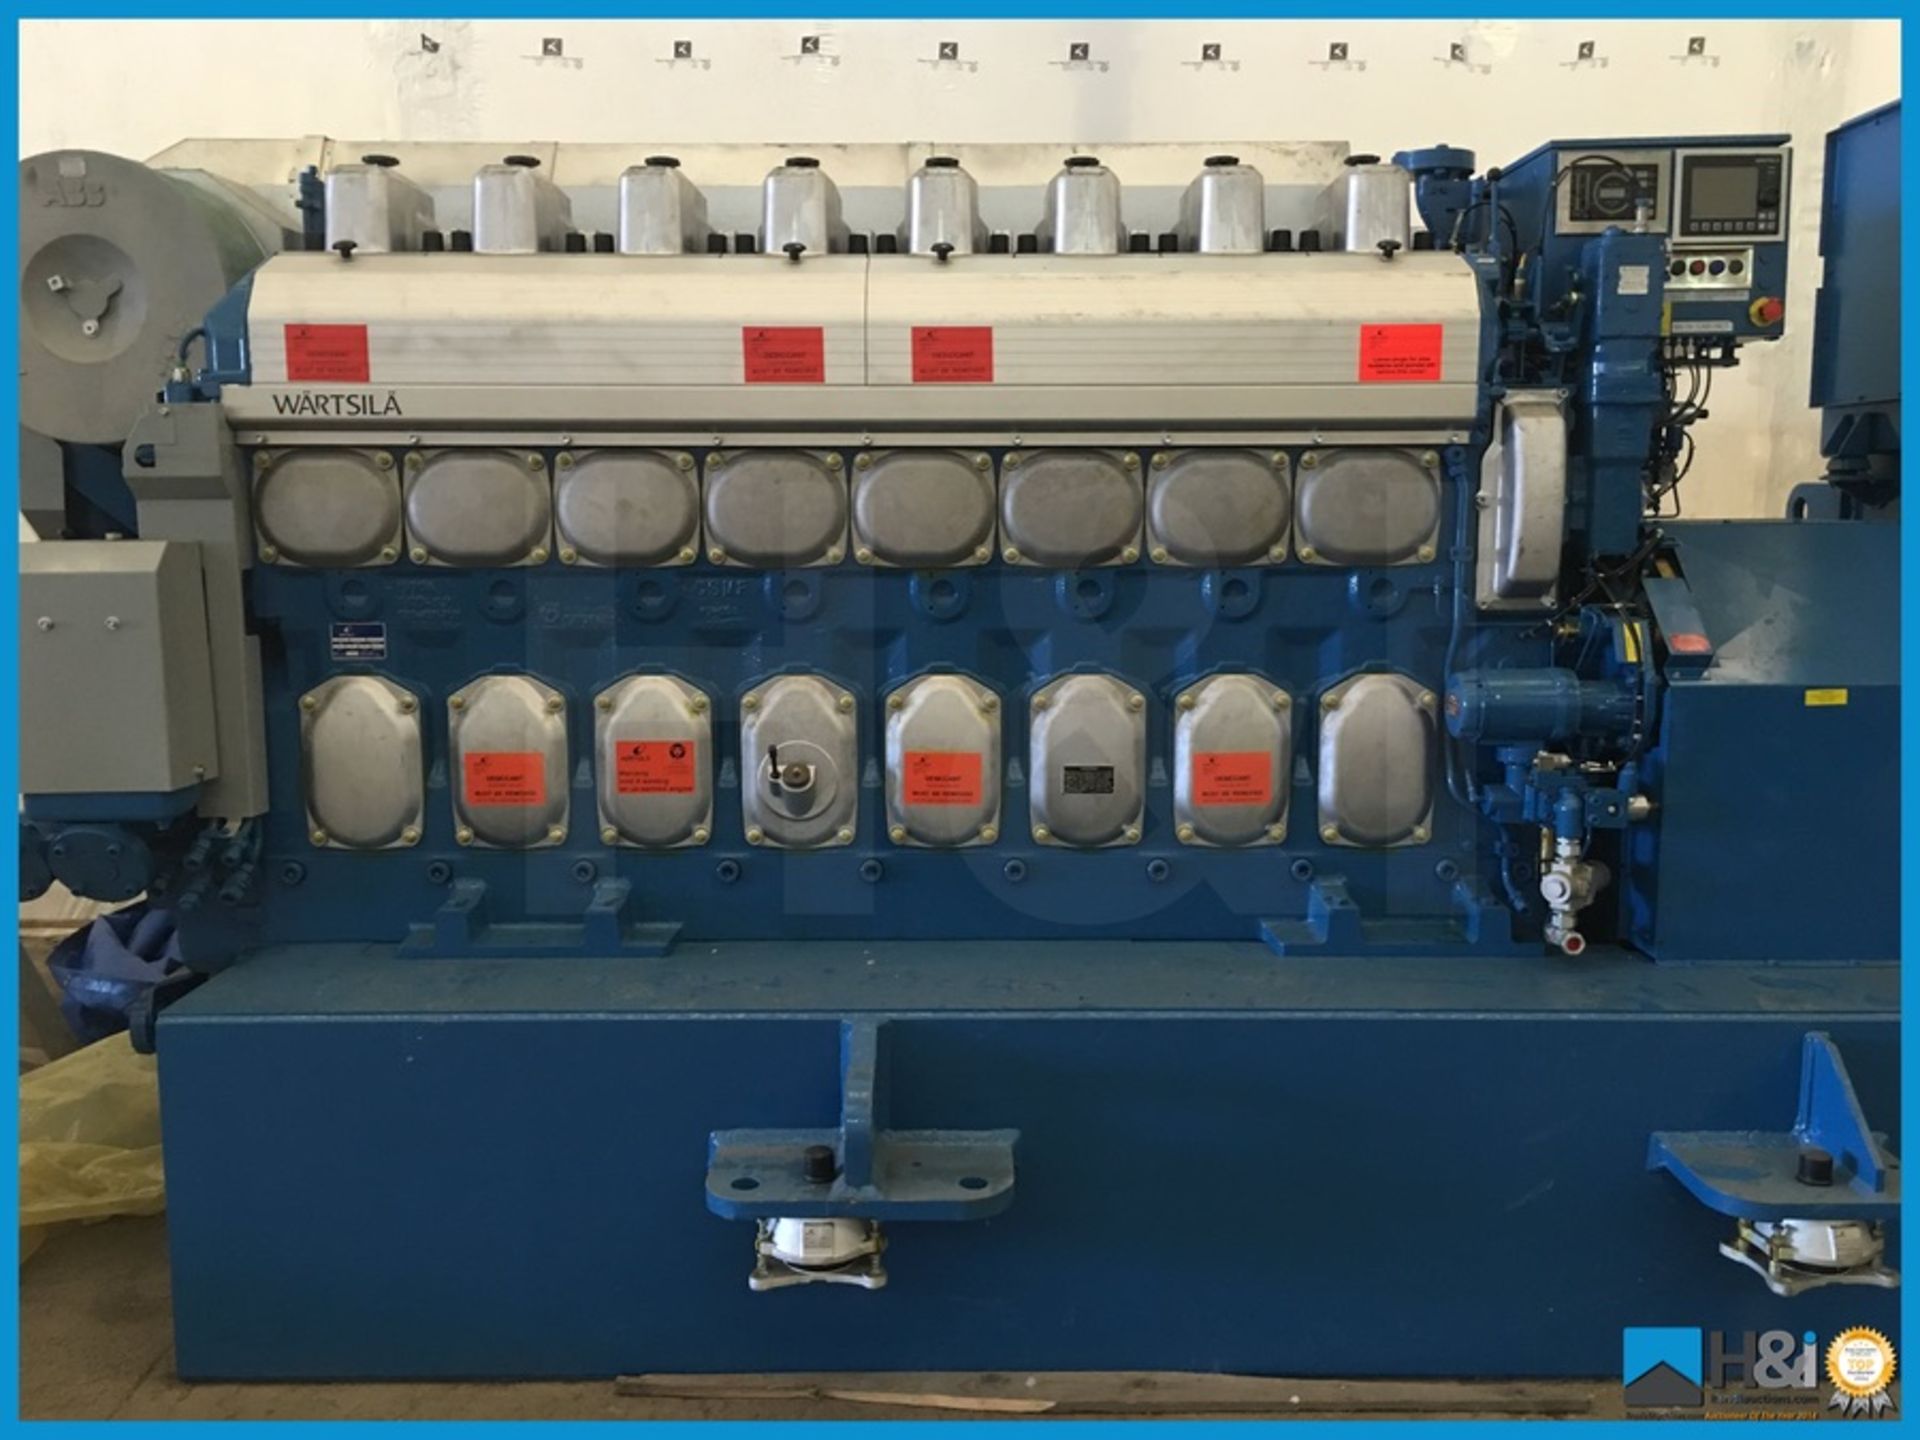 Unused Wartsila 8L20 high capacity diesel generator manufactured in 2013 for a large marine - Image 3 of 19